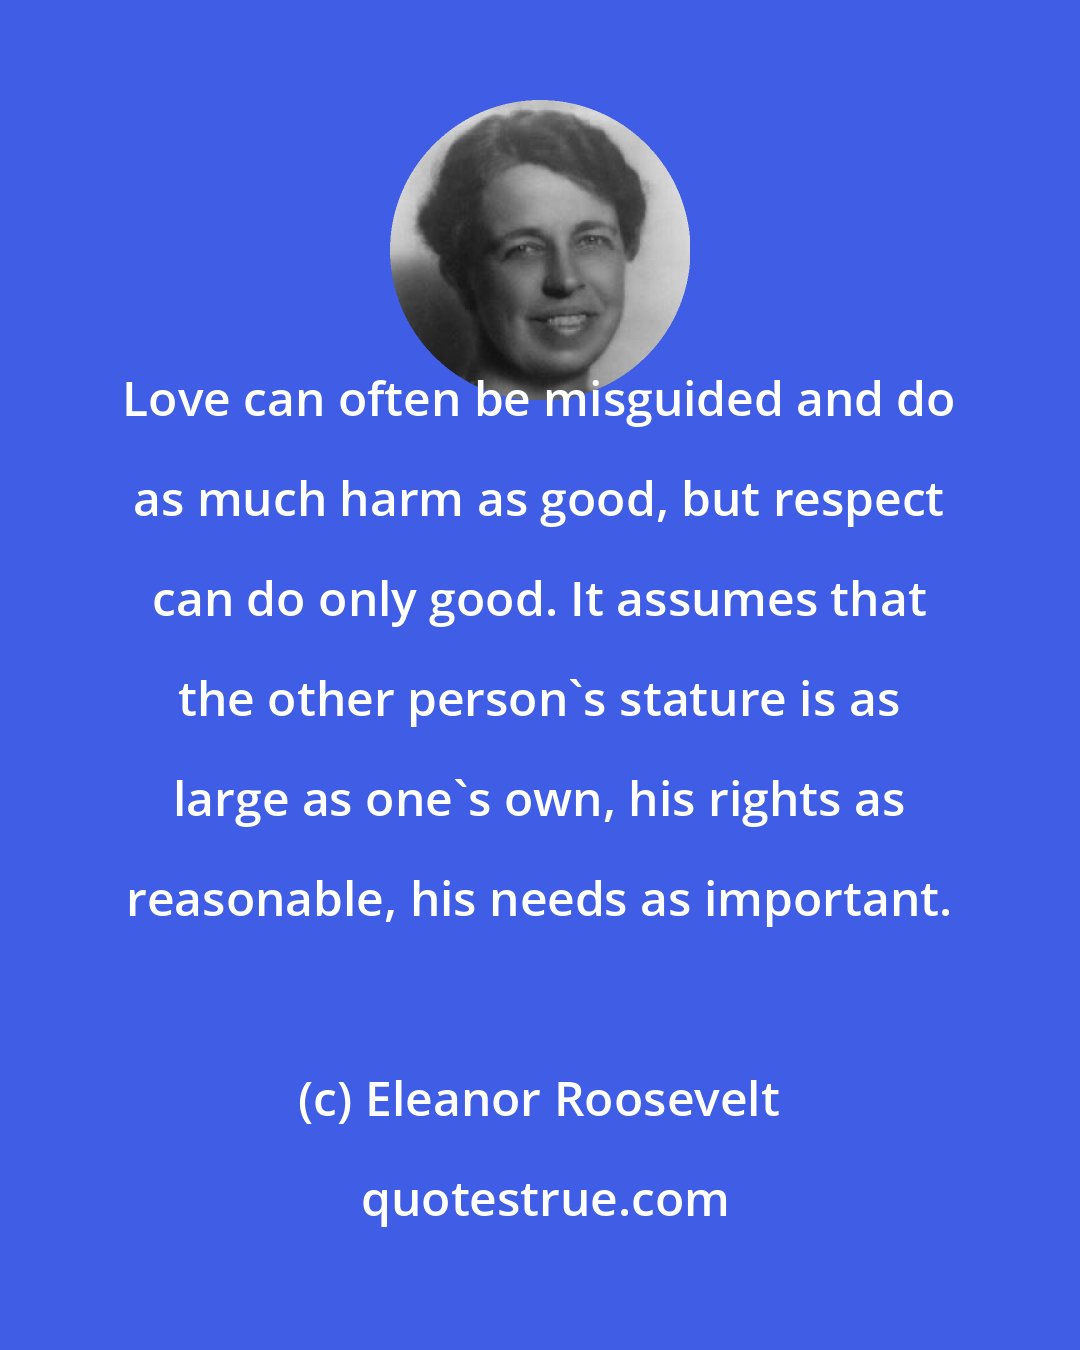 Eleanor Roosevelt: Love can often be misguided and do as much harm as good, but respect can do only good. It assumes that the other person's stature is as large as one's own, his rights as reasonable, his needs as important.